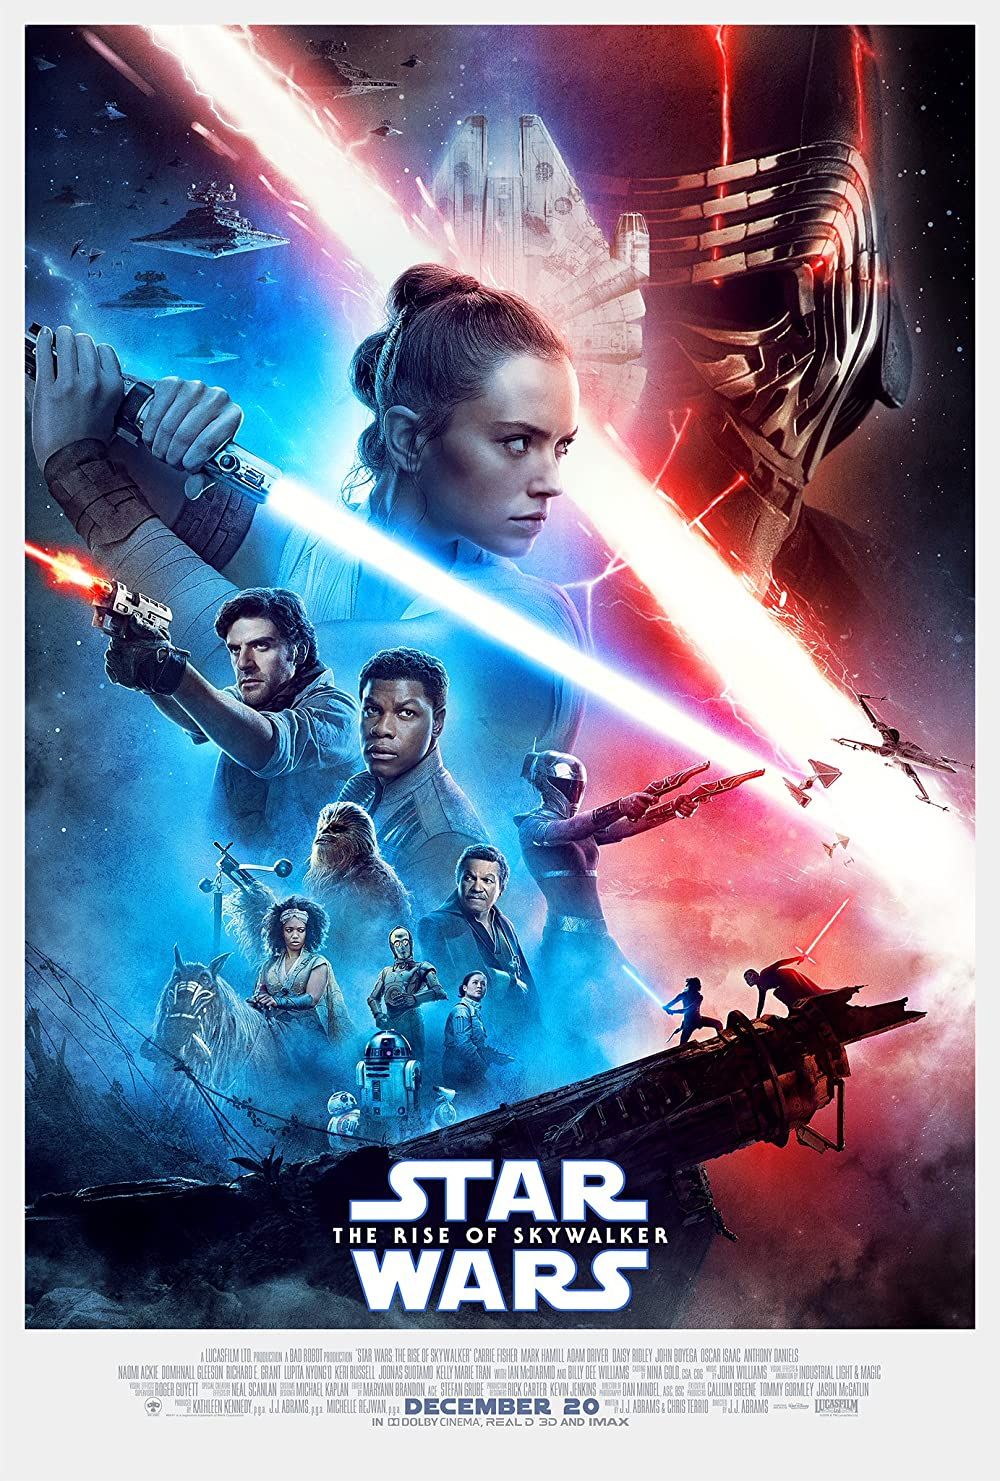 Star Wars The Rise of Skywalker (2019) Hindi Dubbed BluRay download full movie